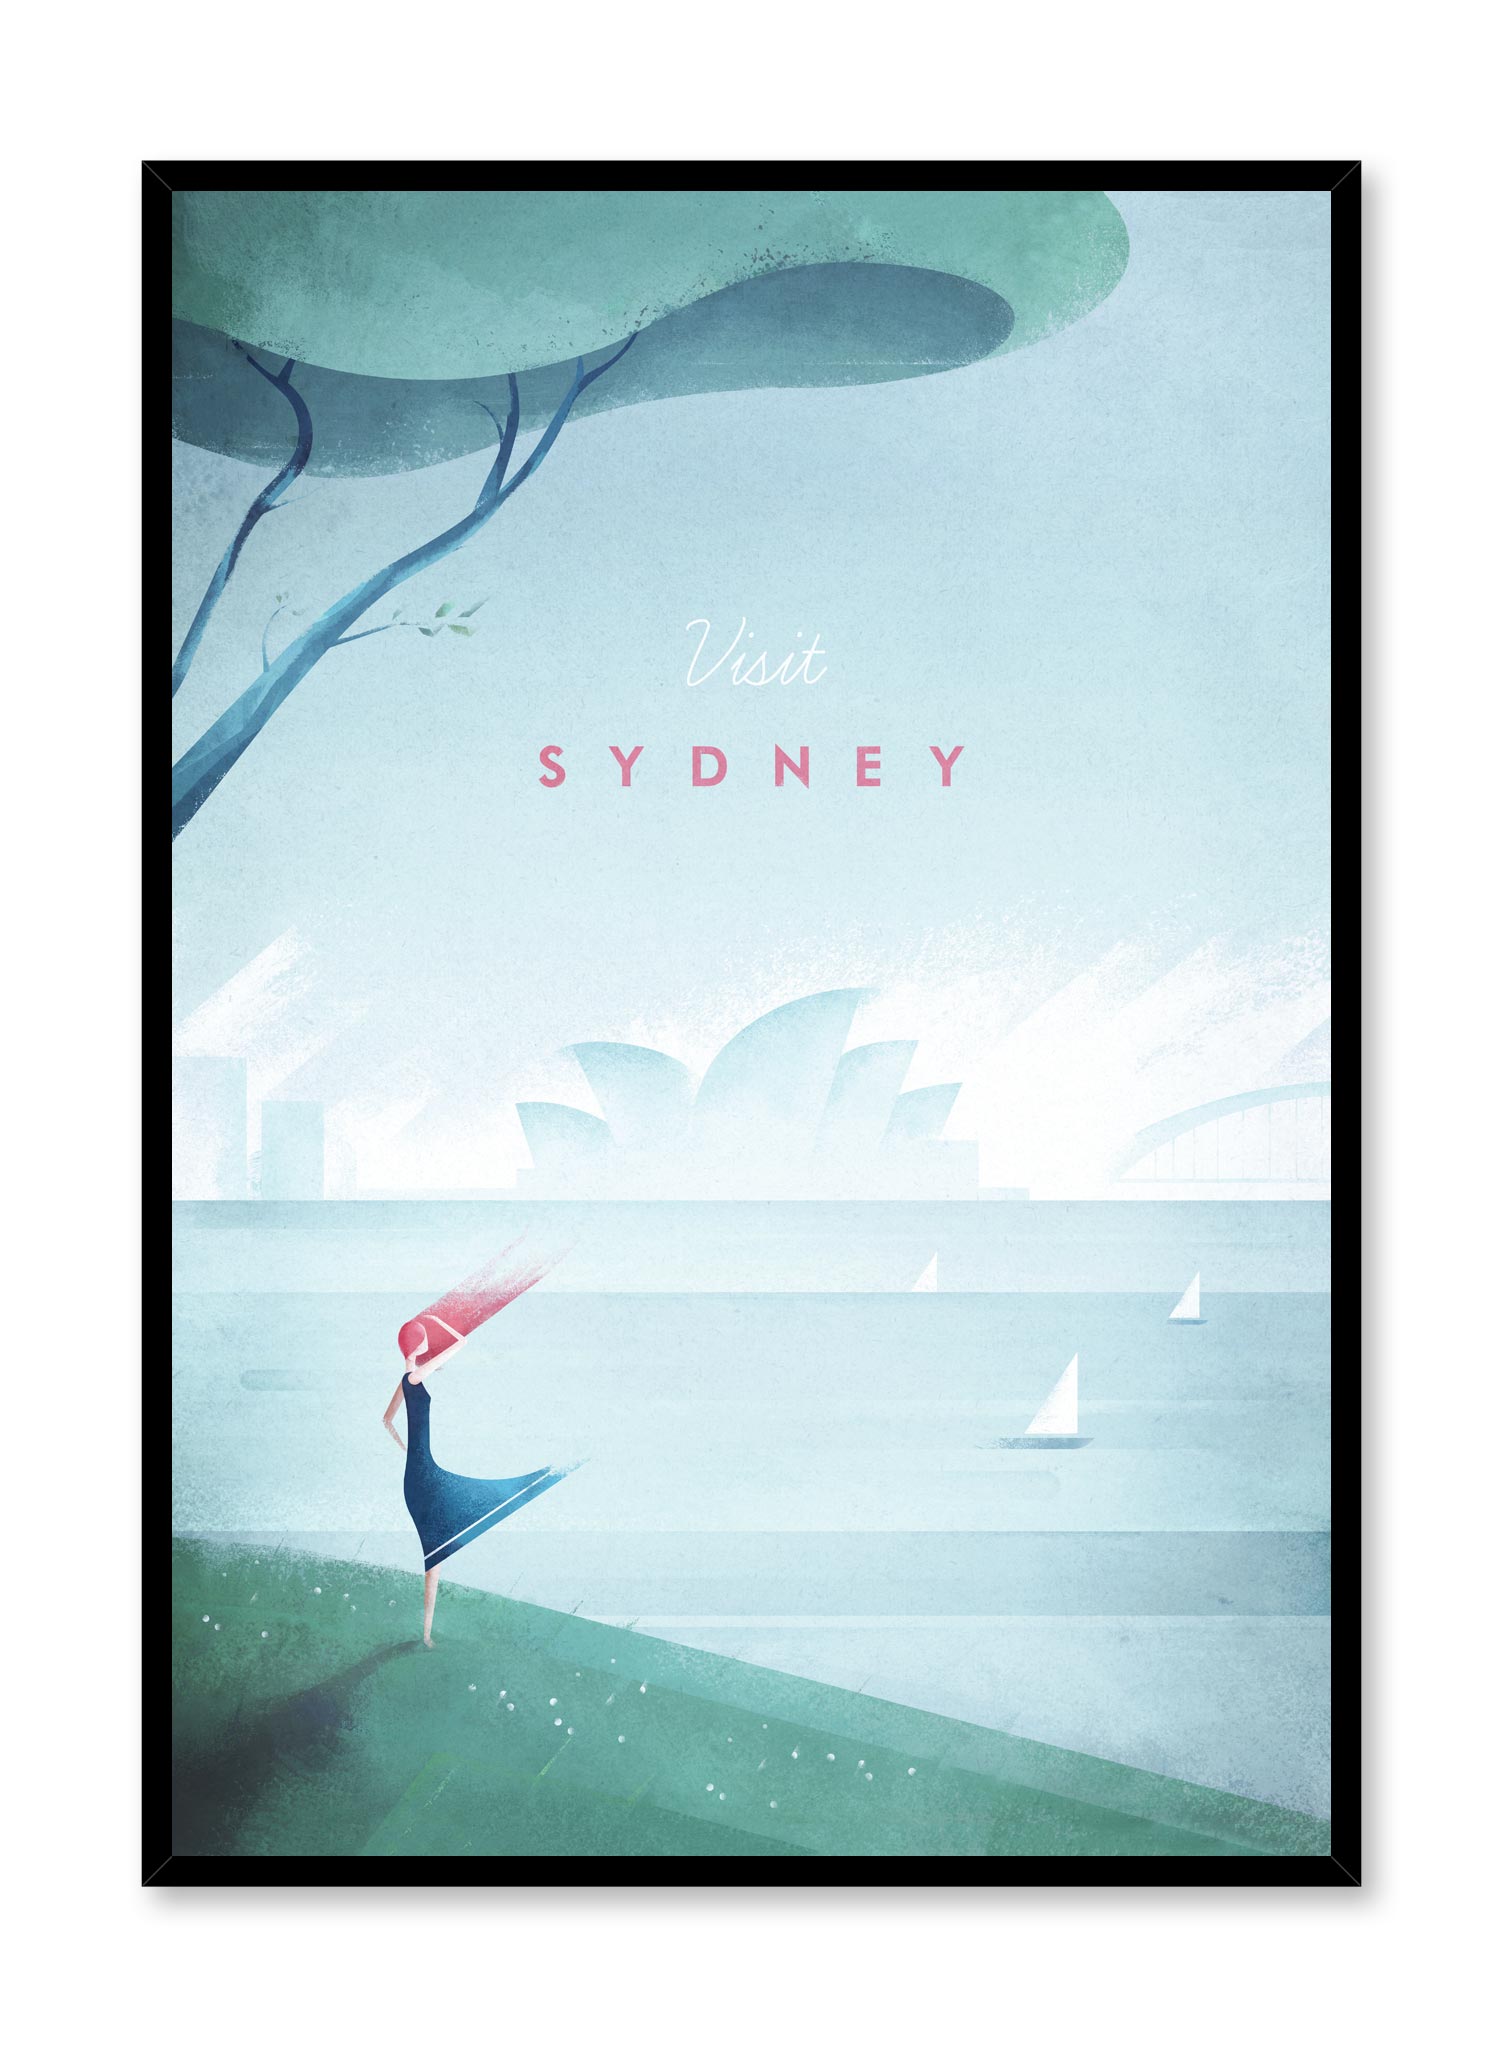 Modern minimalist travel poster by Opposite Wall with illustration of Sydney, Australia